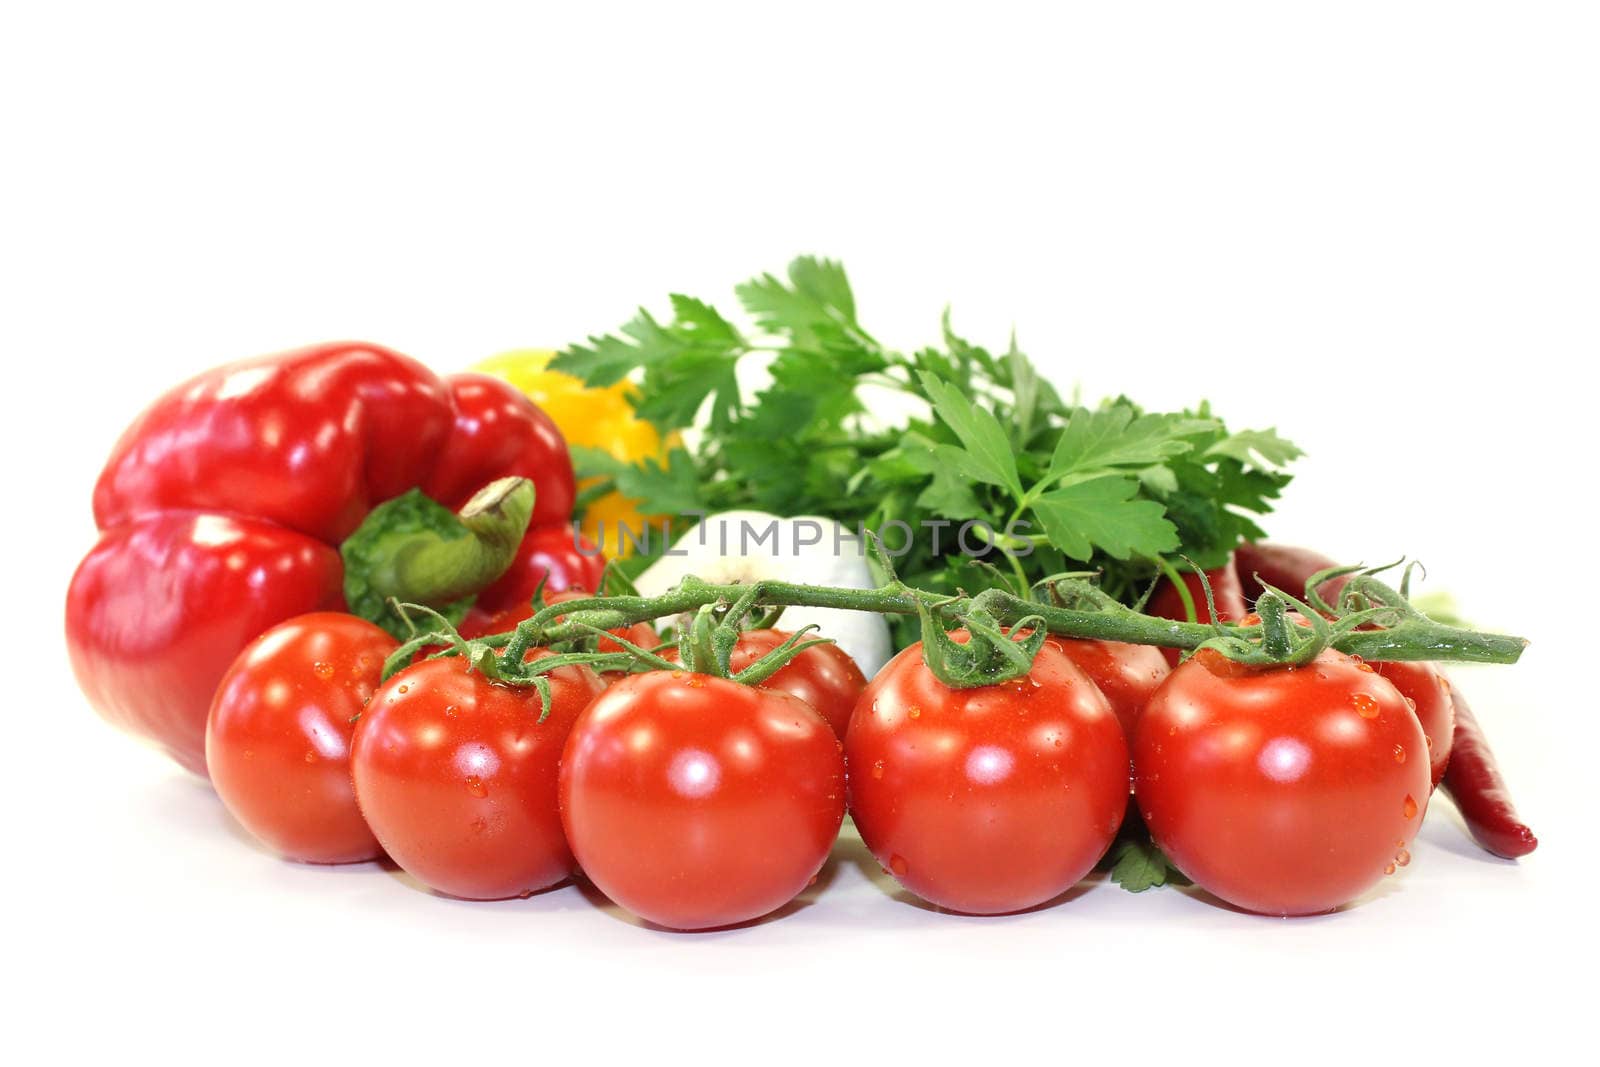 different varieties of vegetables in front of white background